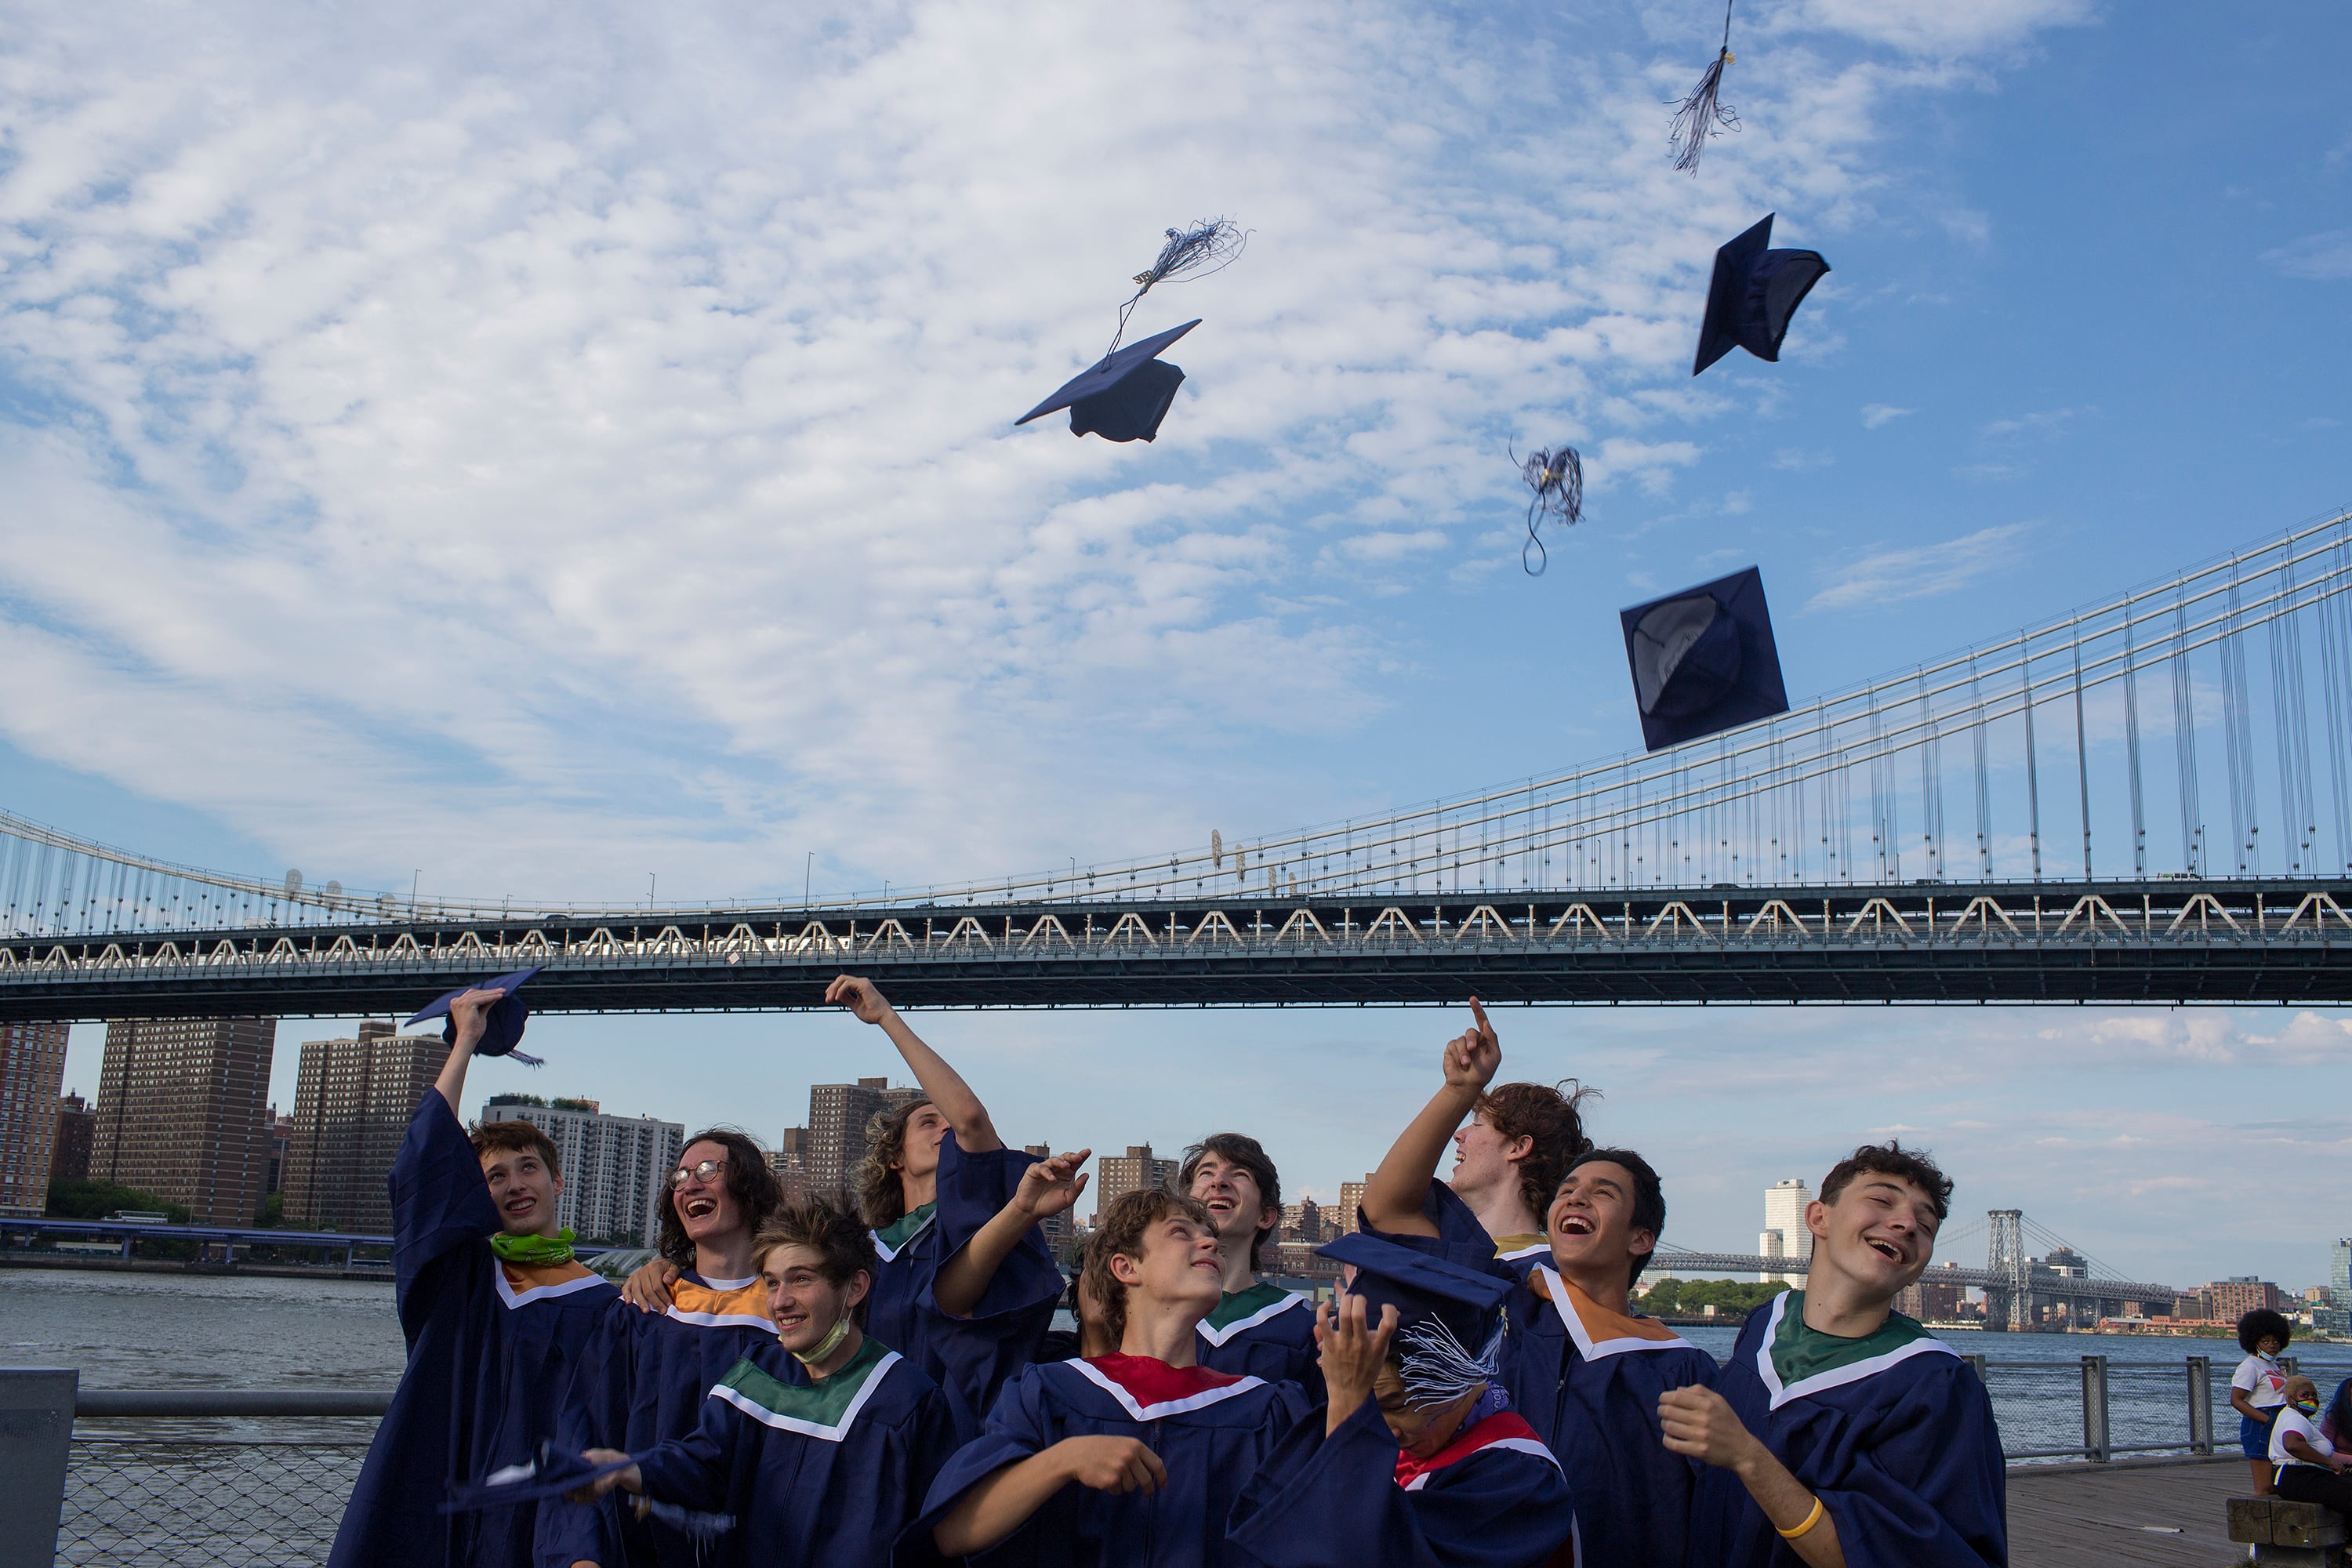 A group of high schoolers throw their graduation caps up in the air with the Brooklyn Bridge and a blue sky in the background.